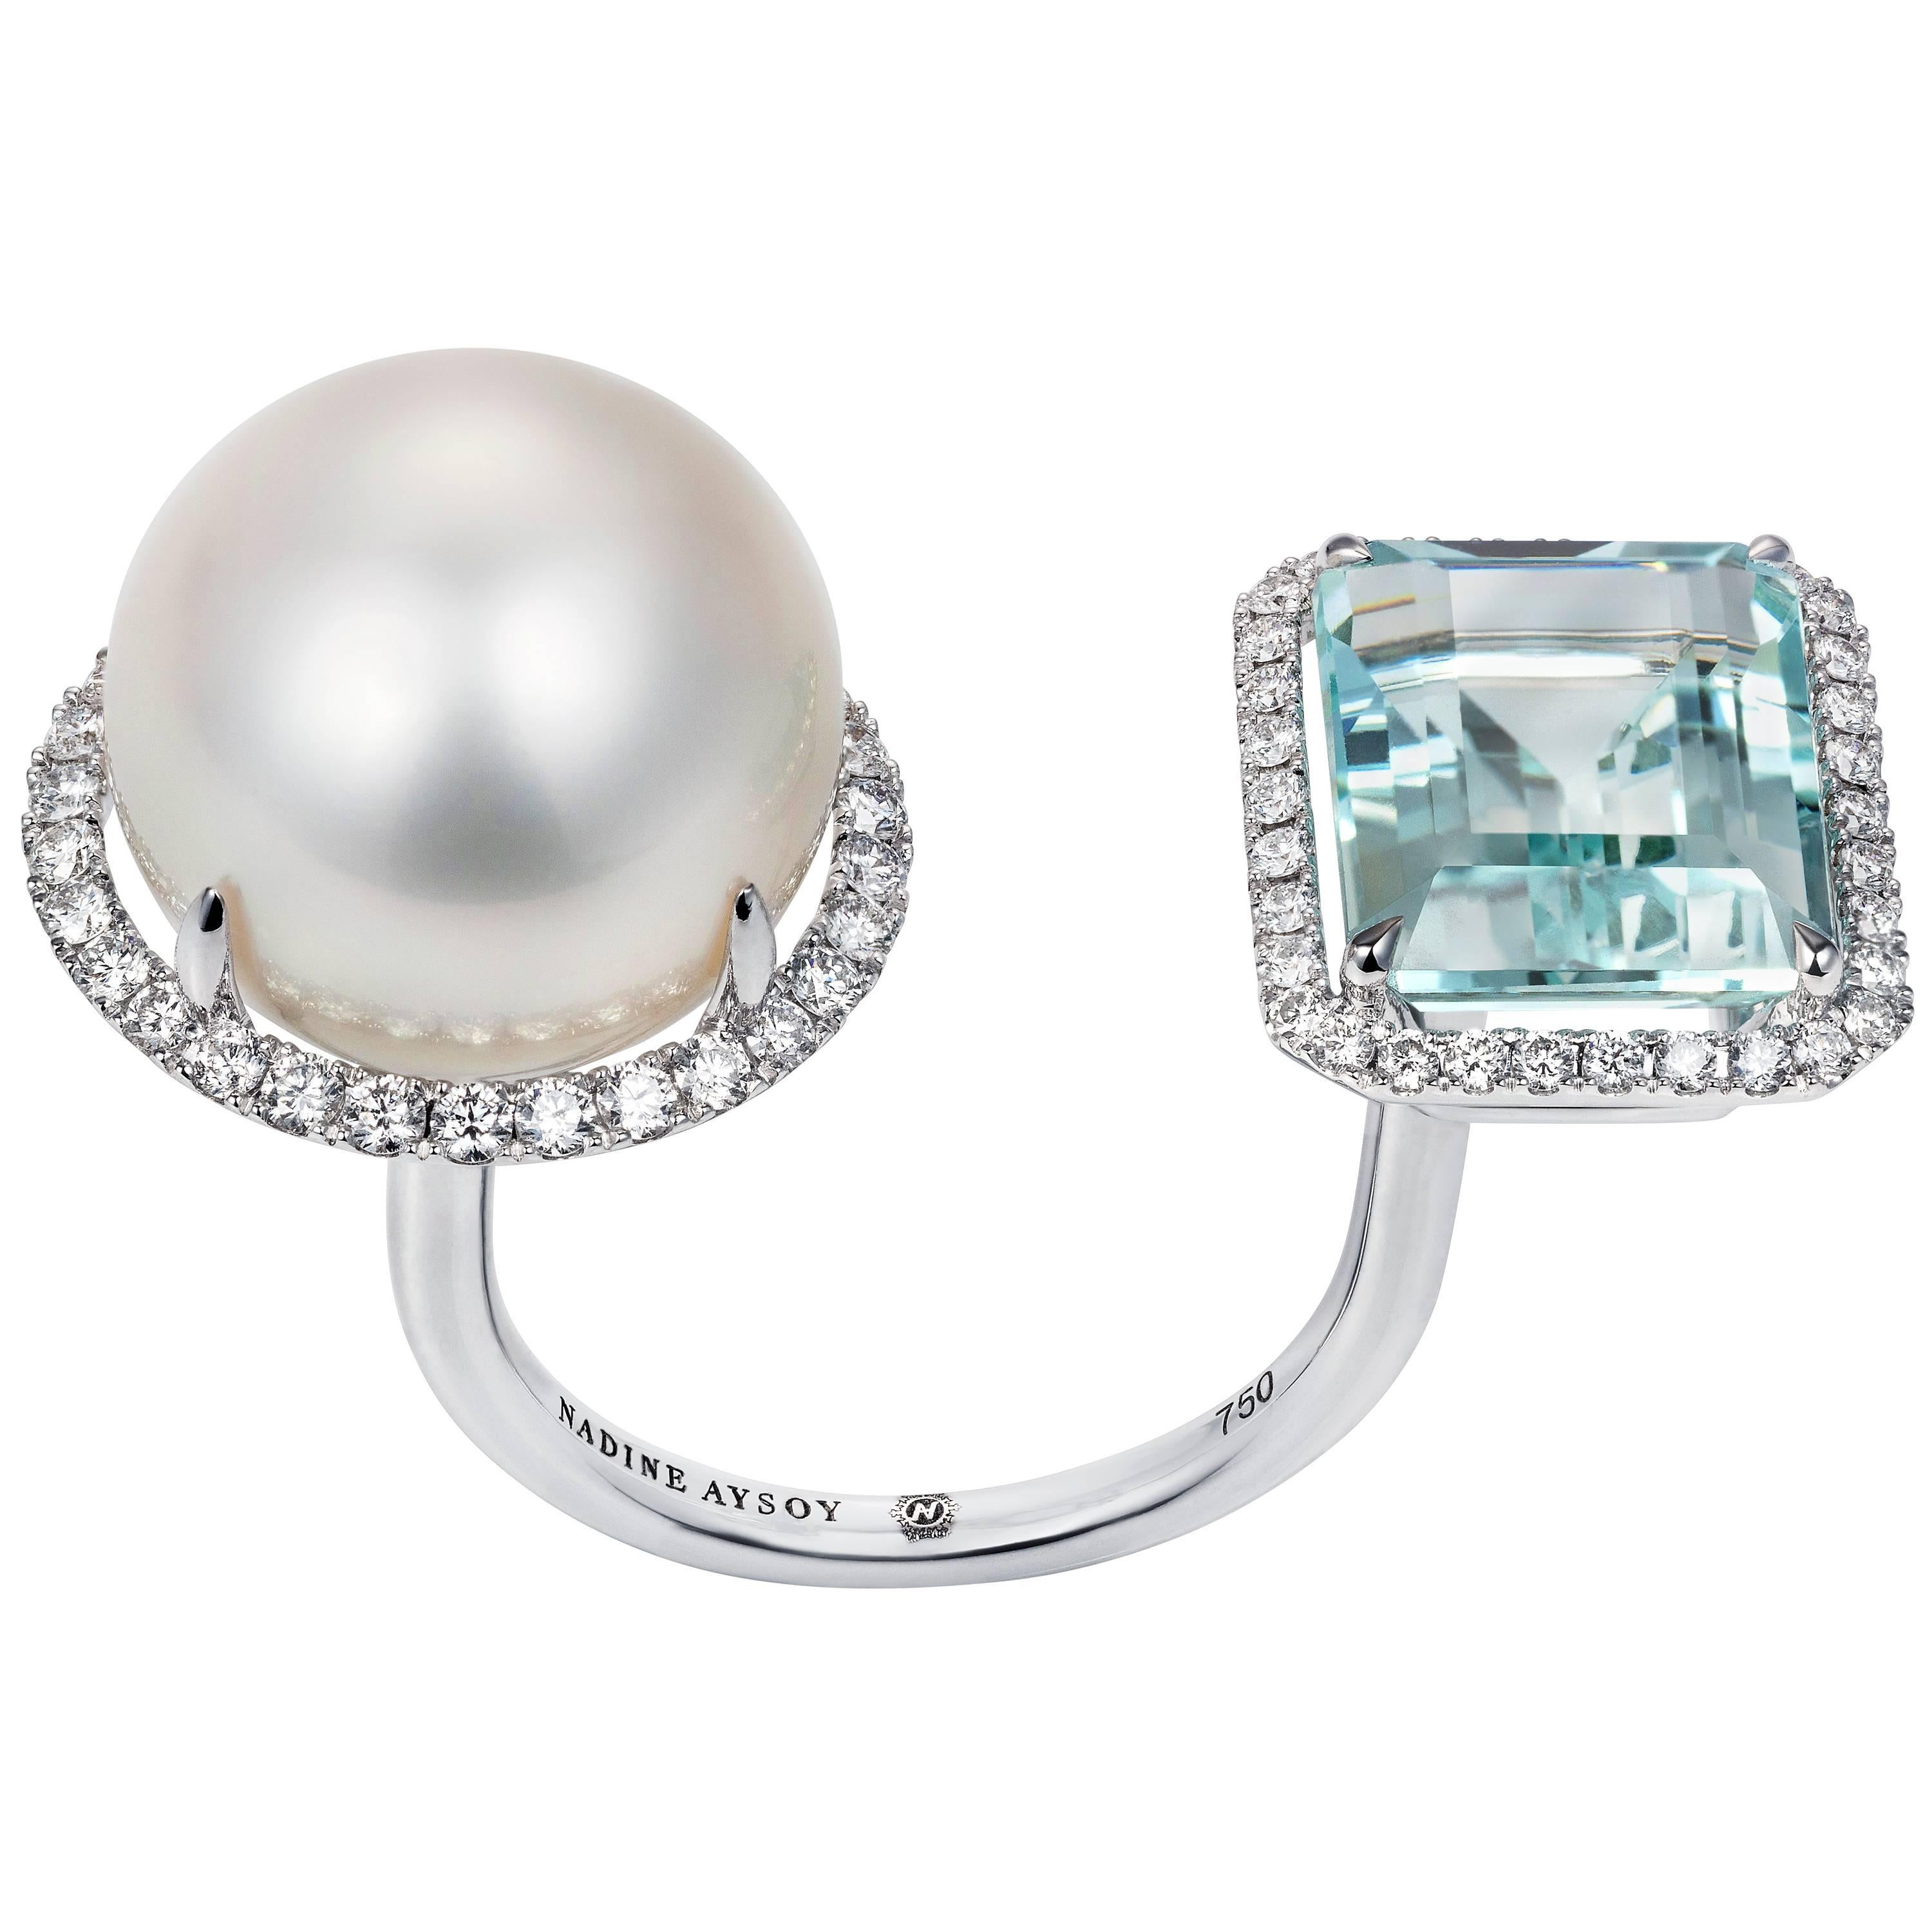 Nadine Aysoy Elle et Lui White Gold Aquamarine and South Sea Pearl Diamond Ring For Sale